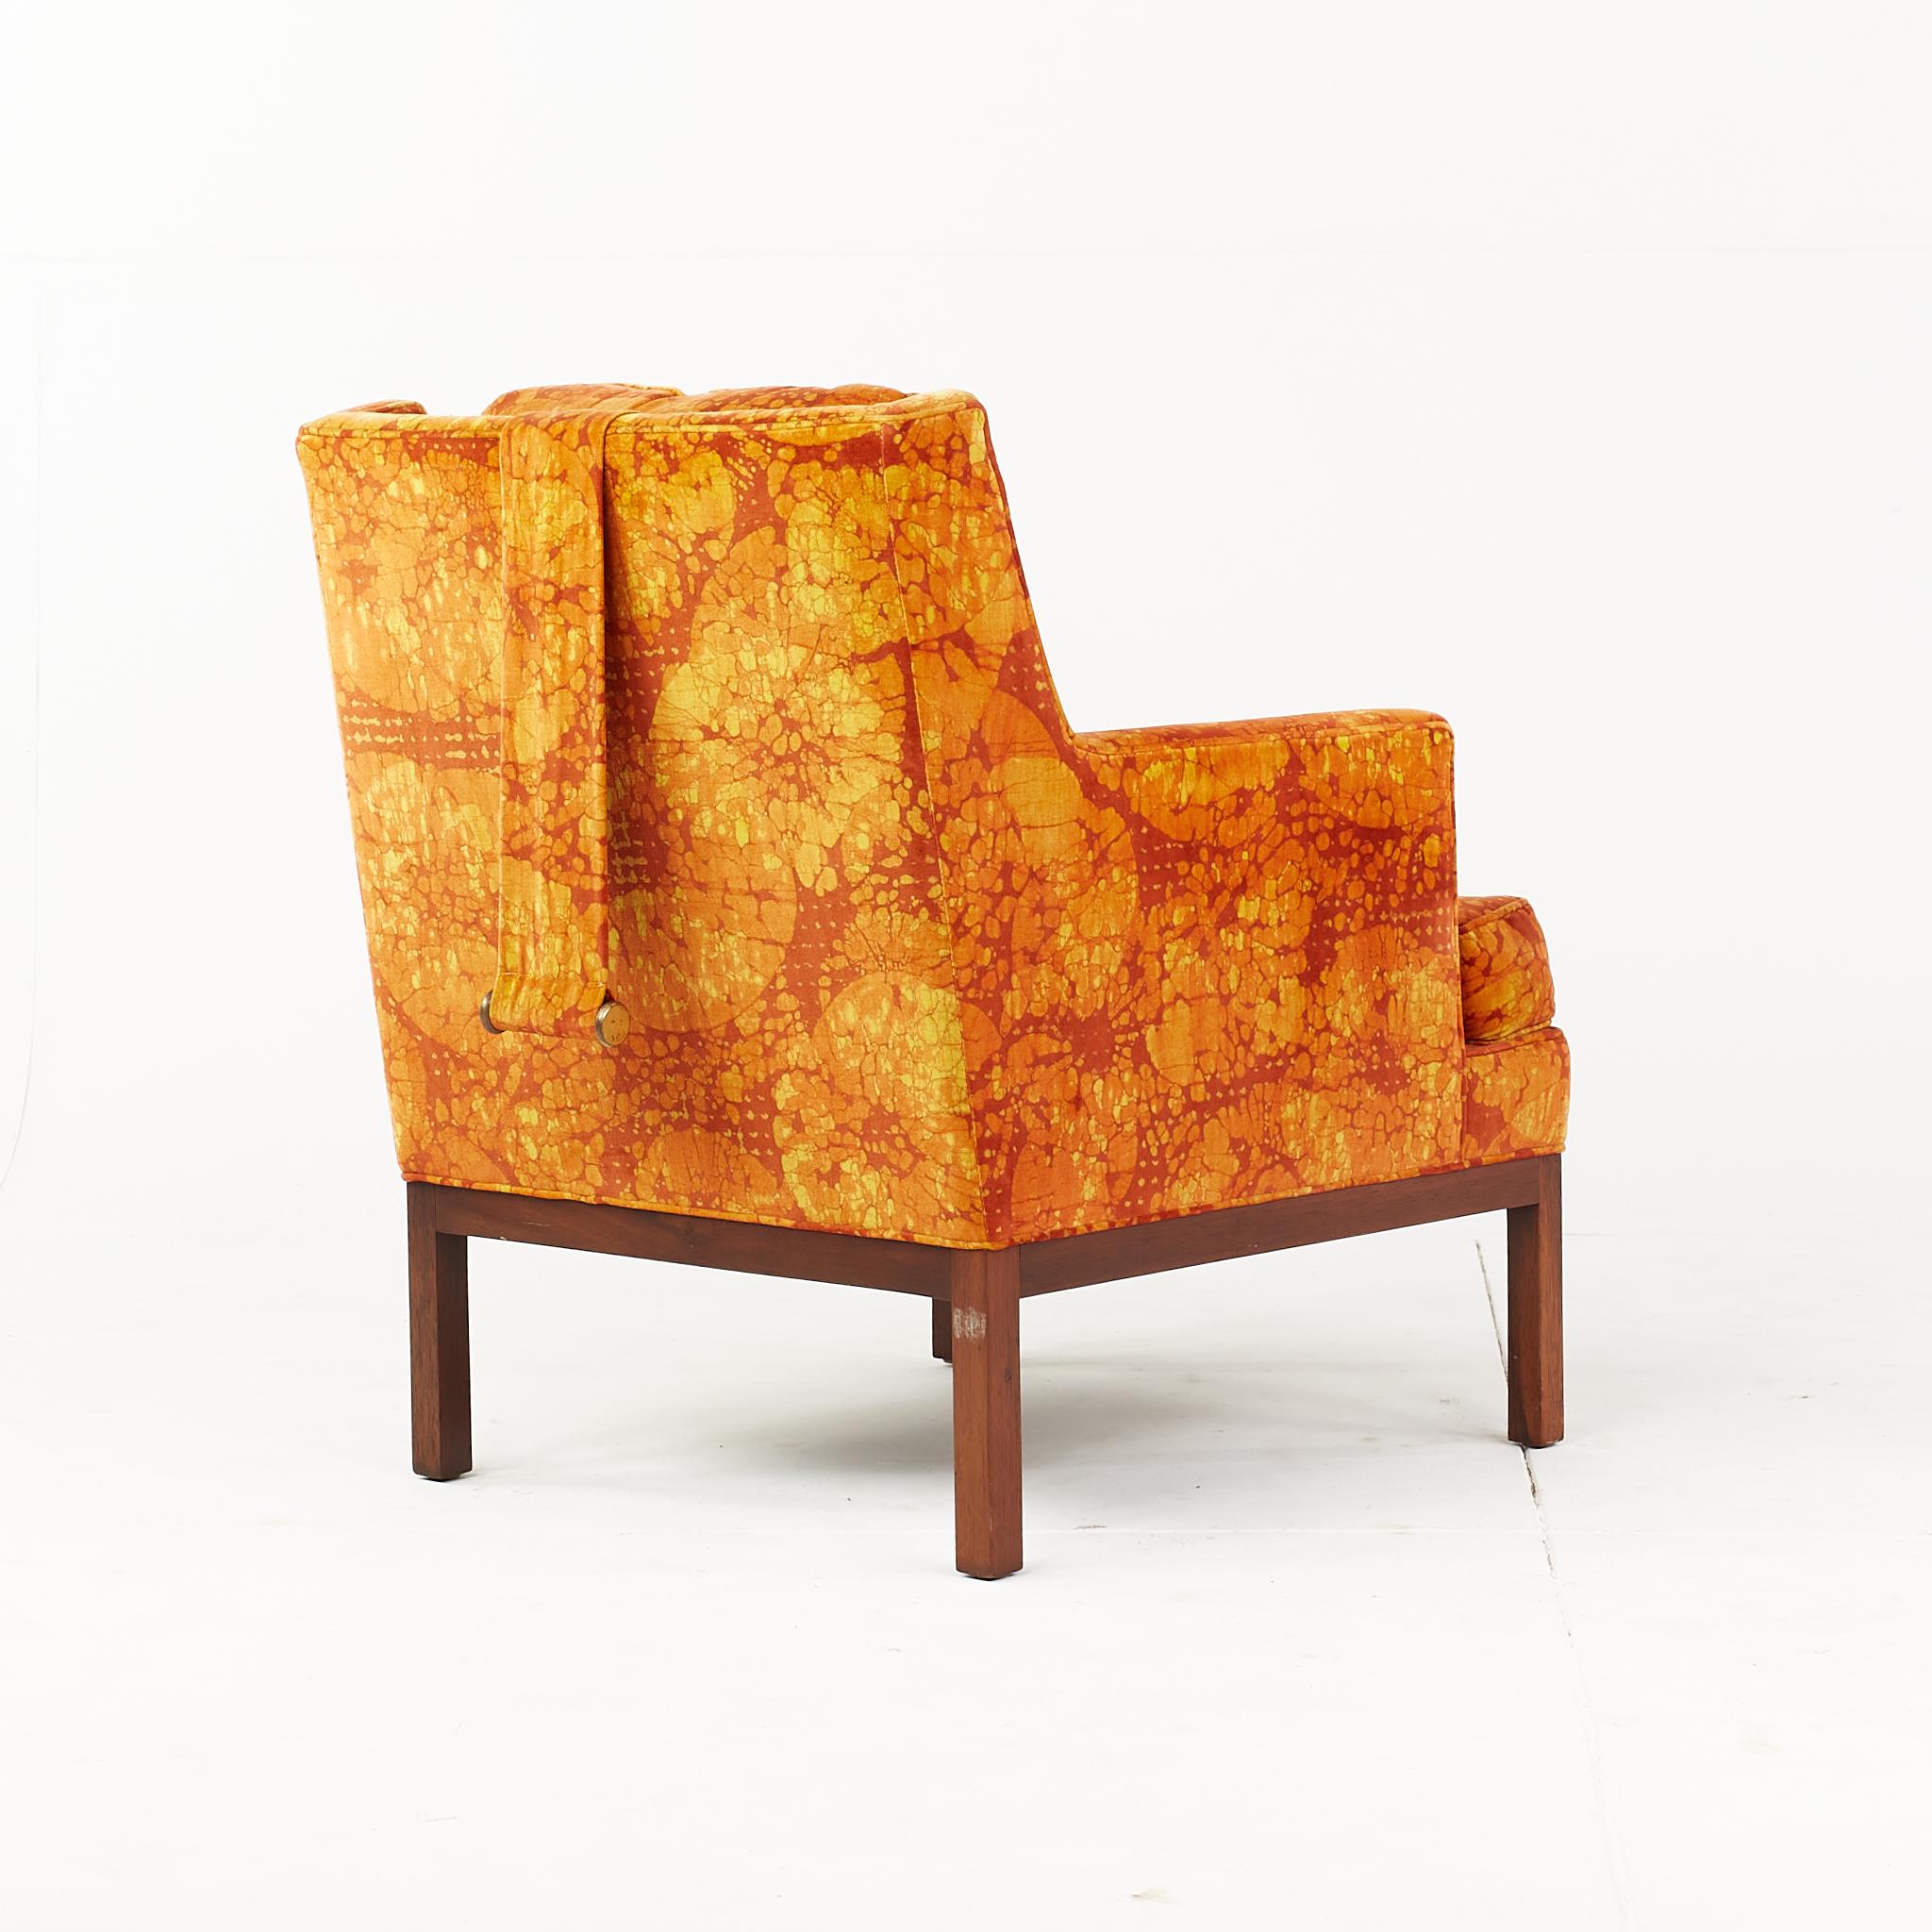 American Edward Wormley for Dunbar Mid Century Lounge Chair with Jack Lenor Larsen Fabric For Sale